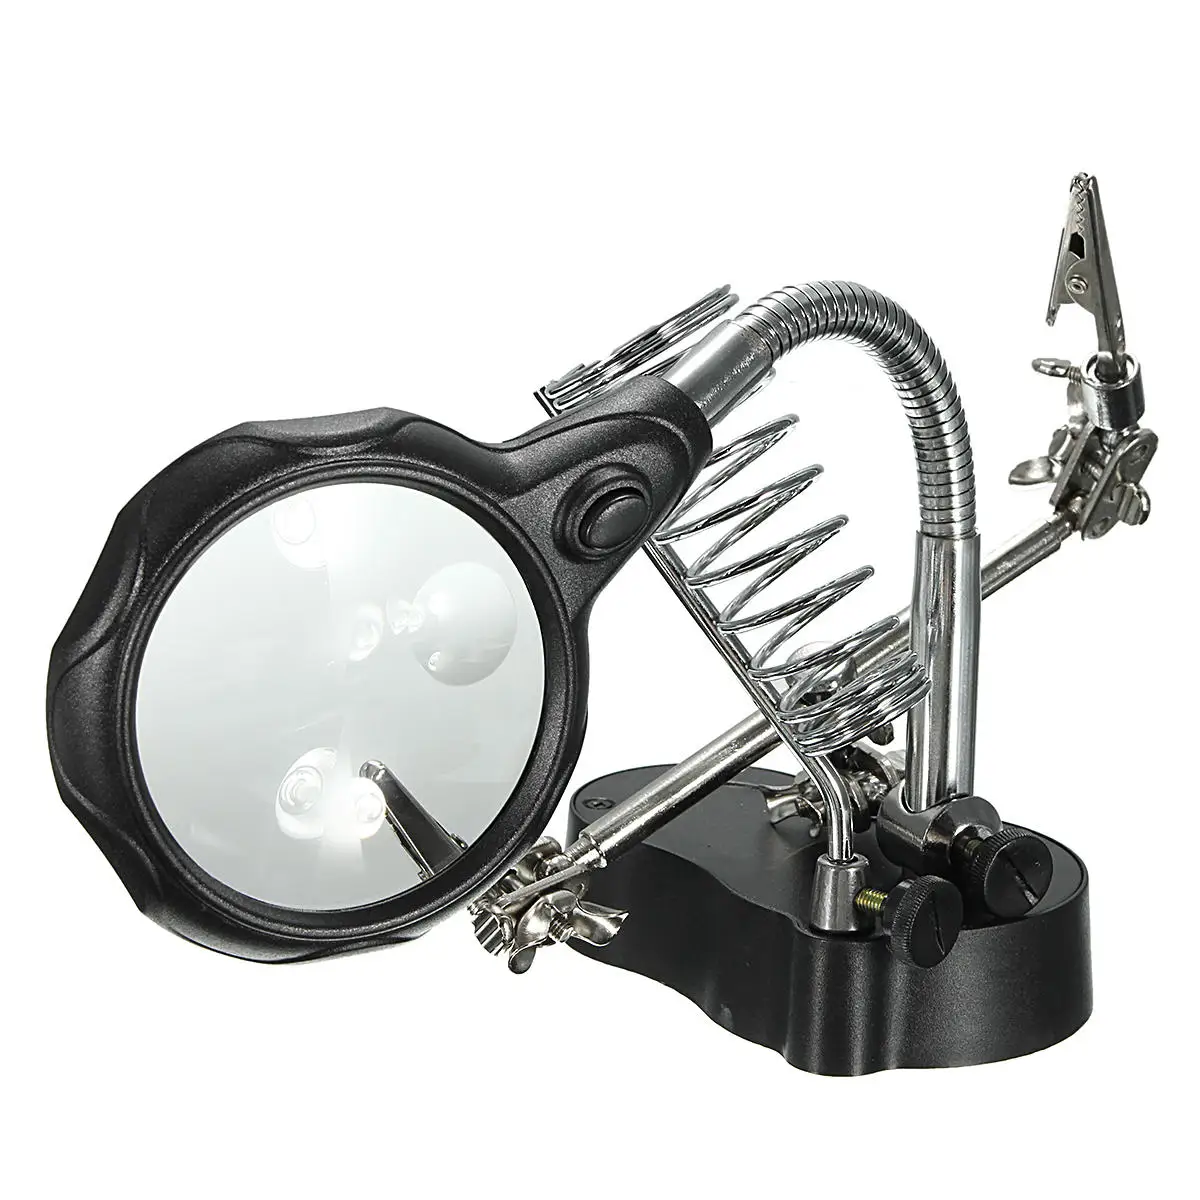 SALUTUYA LED Magnifier Stable Base Welding LED Magnifier,for Assemble Products or Model Makers